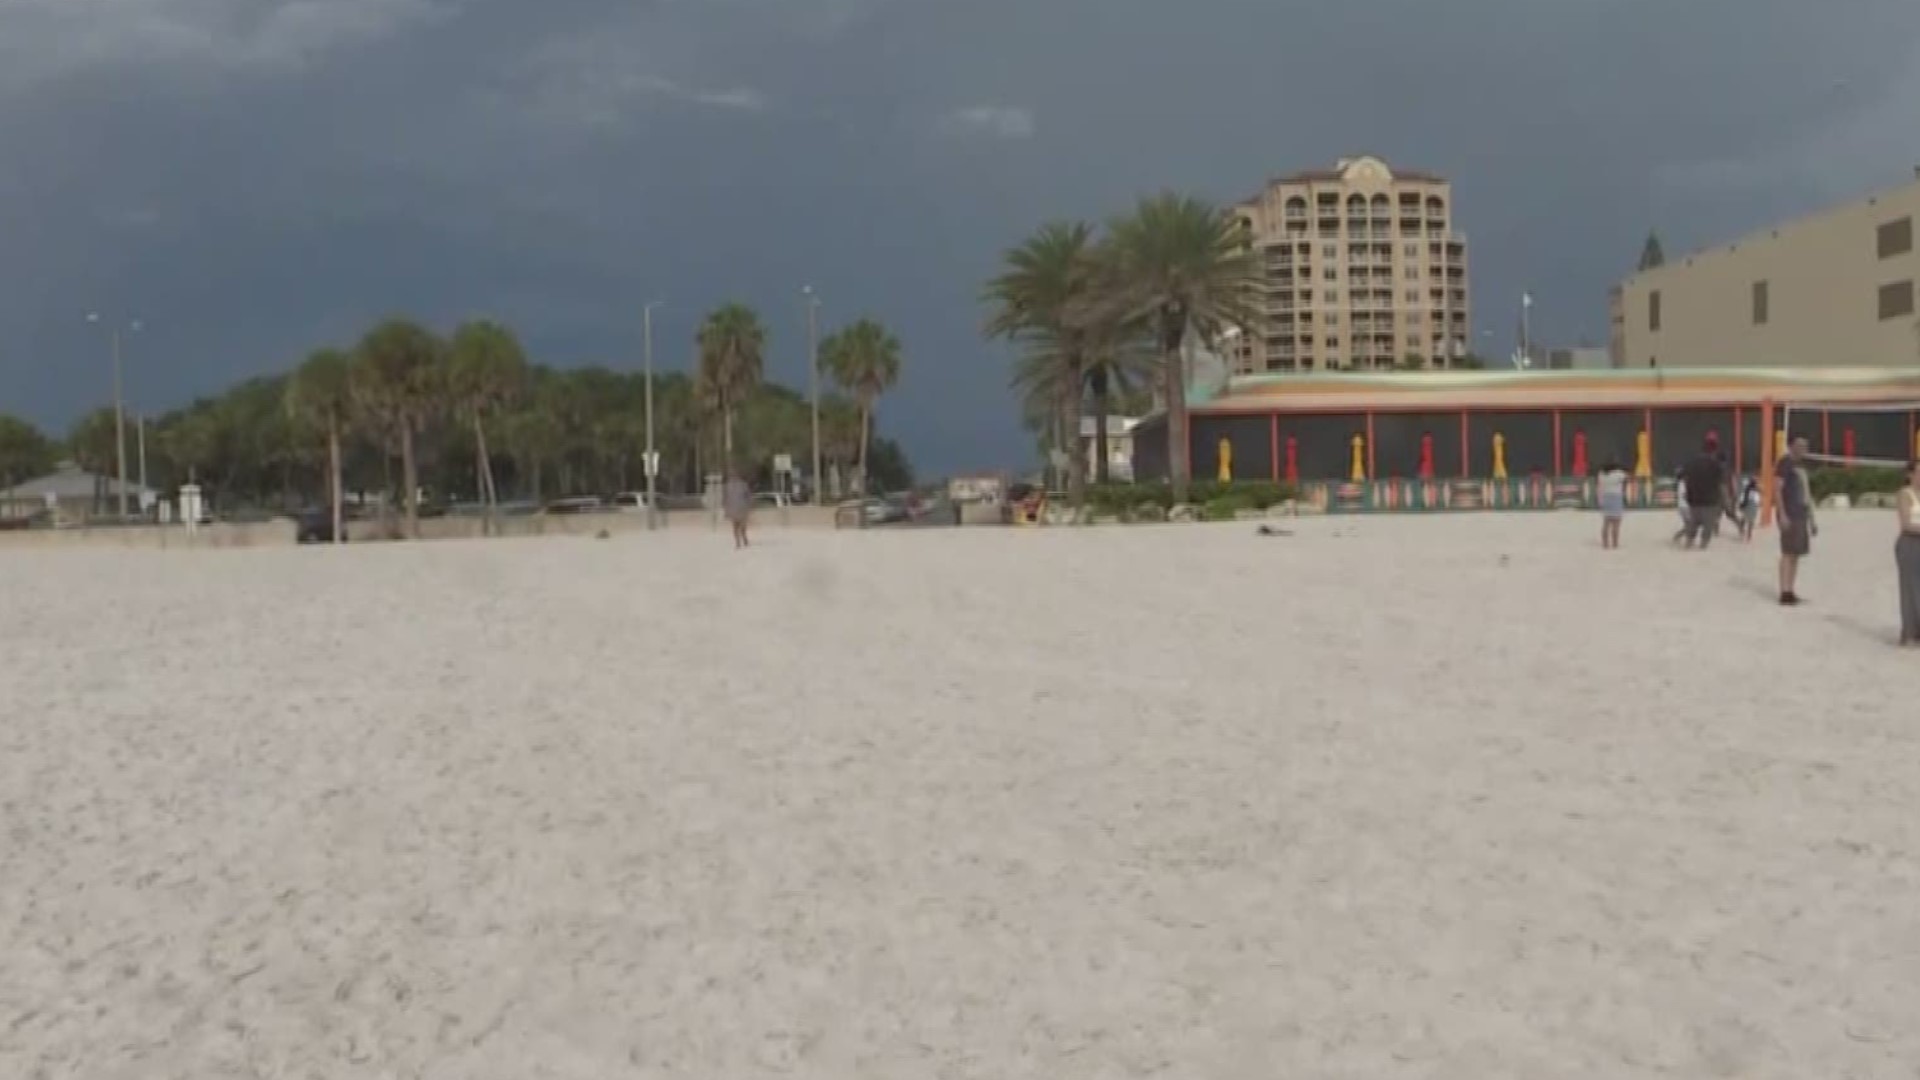 One person was struck by lightning on Clearwater Beach as a thunderstorm rolled through.

The victim, a man in his 40s, went into cardiac arrest and is in critical condition, according to the Clearwater Police Department. Seven other people near the man were injured, the agency added.

It happened around 12:42 p.m. Sunday on the beach near Frenchy's Rockaway Grill, located at 7 Rockaway Street.